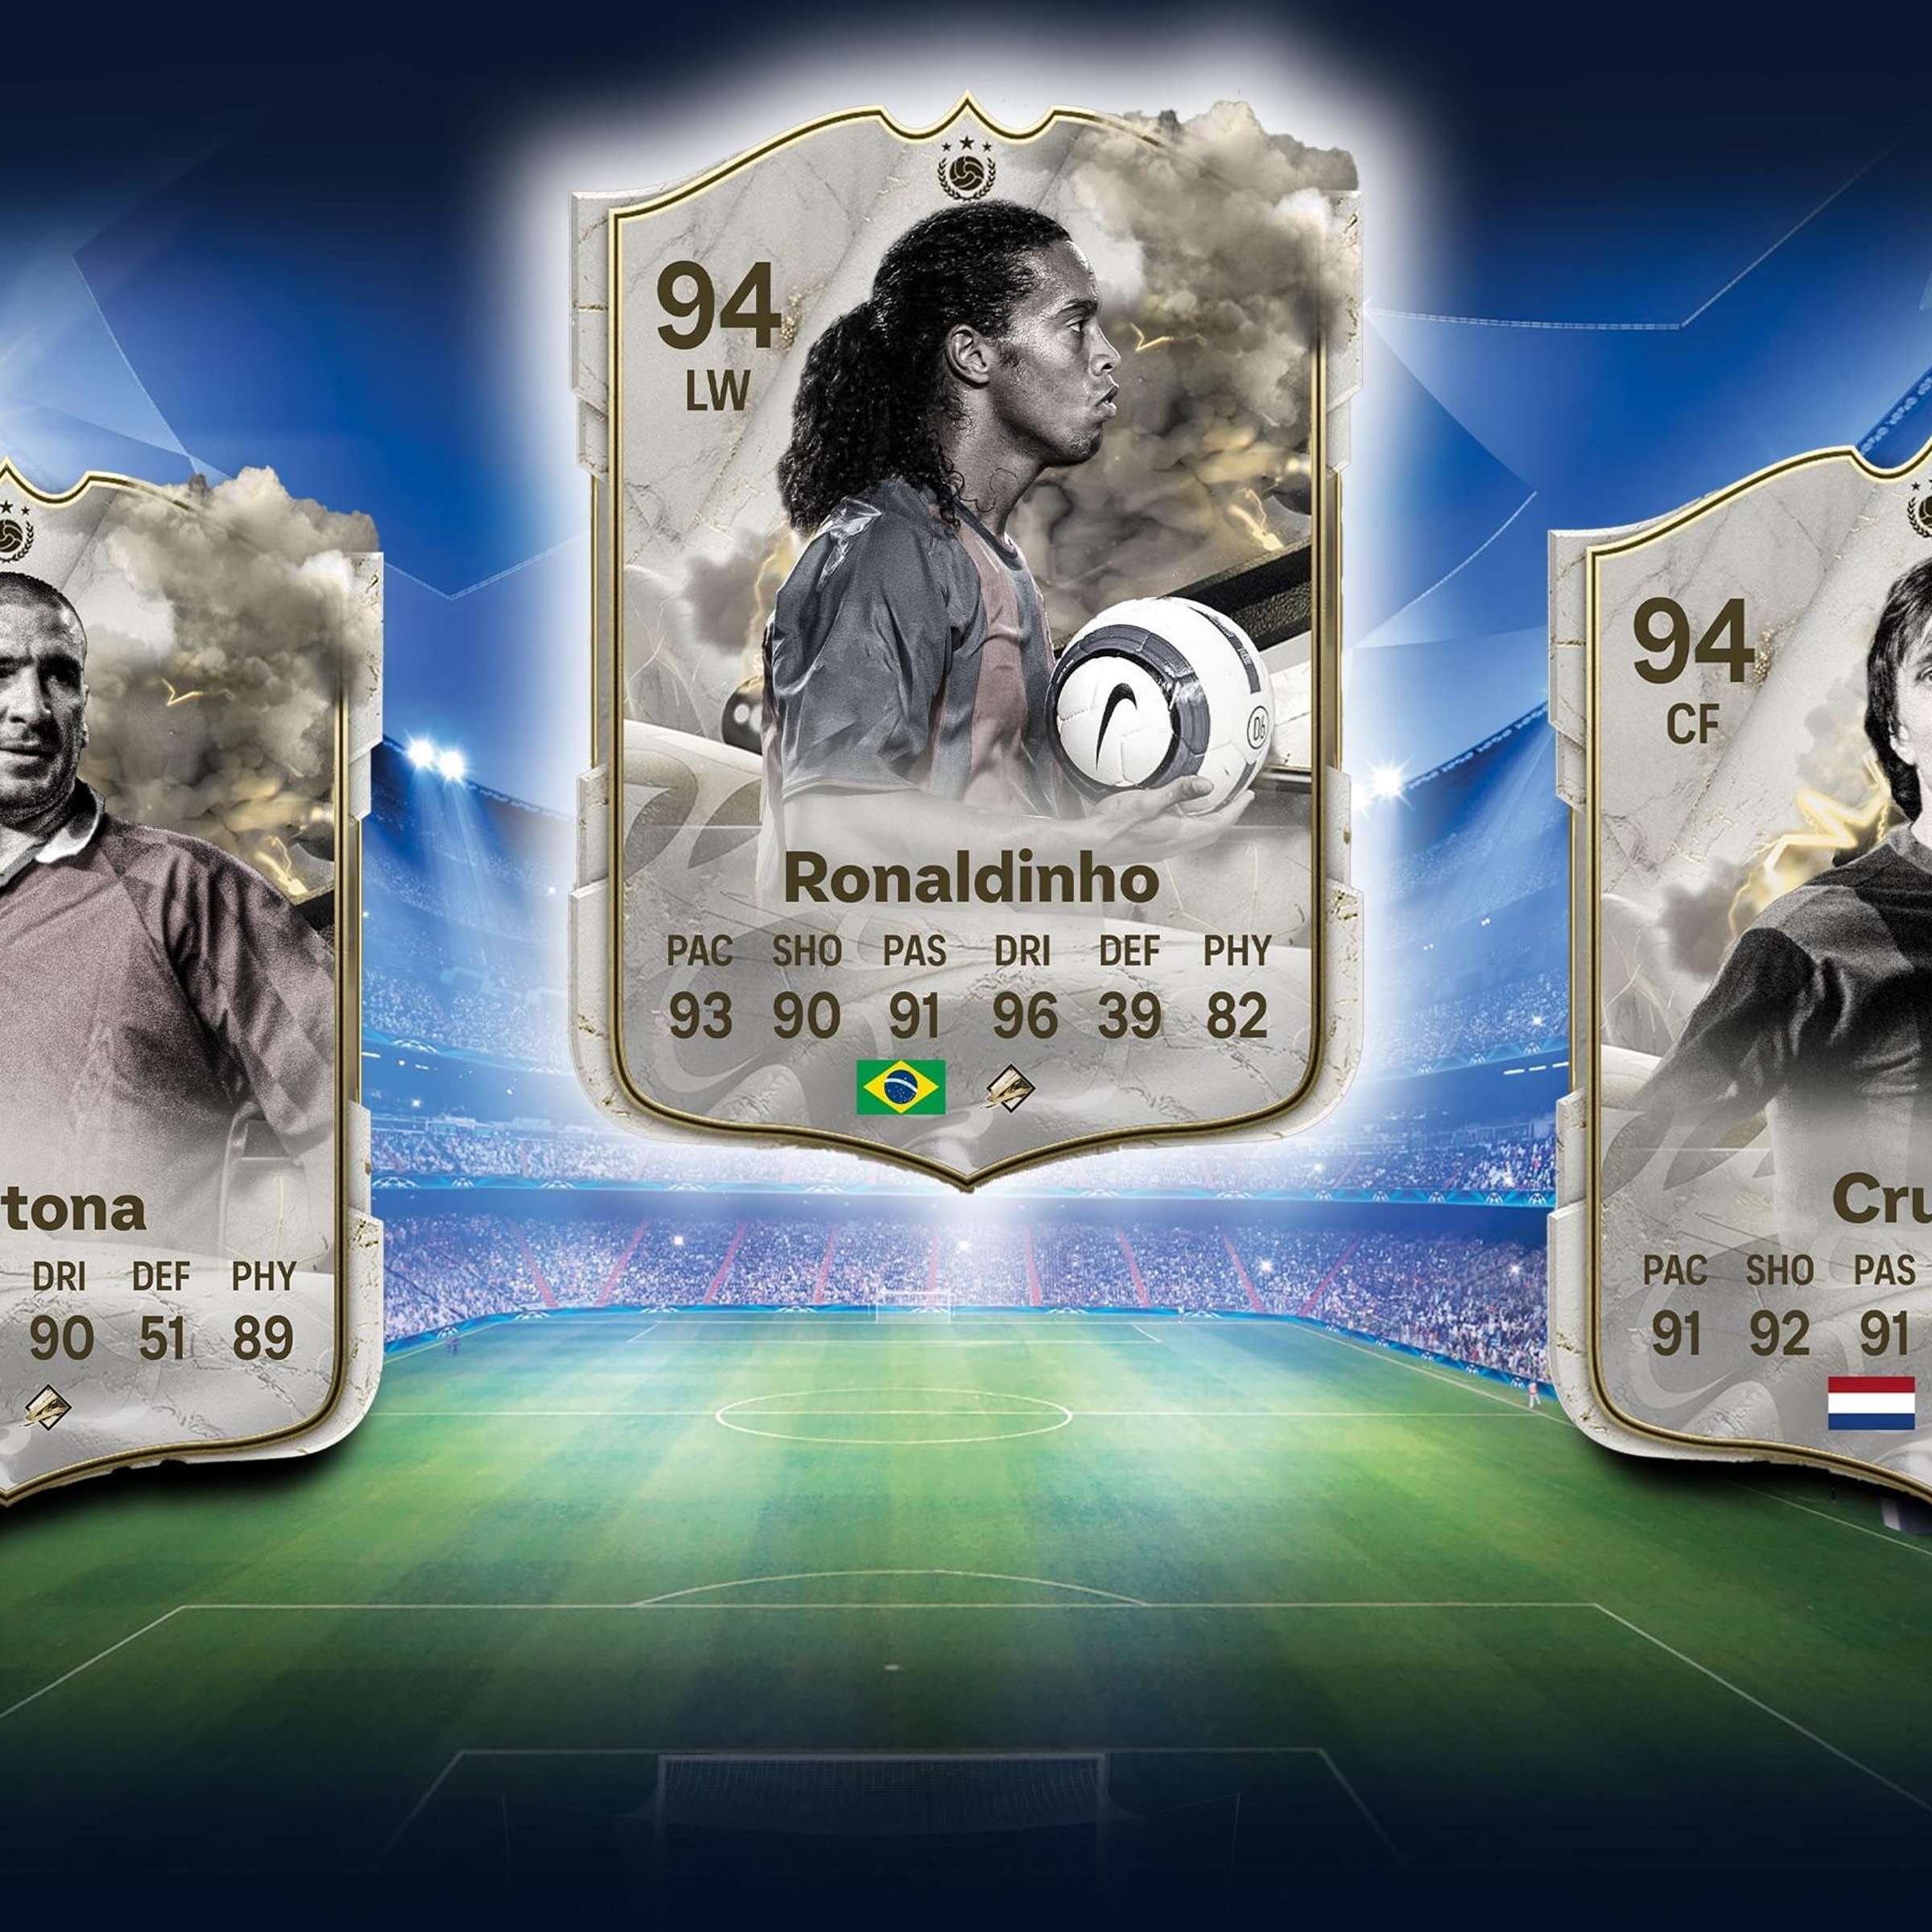 EA FC 24 leaks hint at Ronaldinho and Henry being part of the Thunderstruck  promo